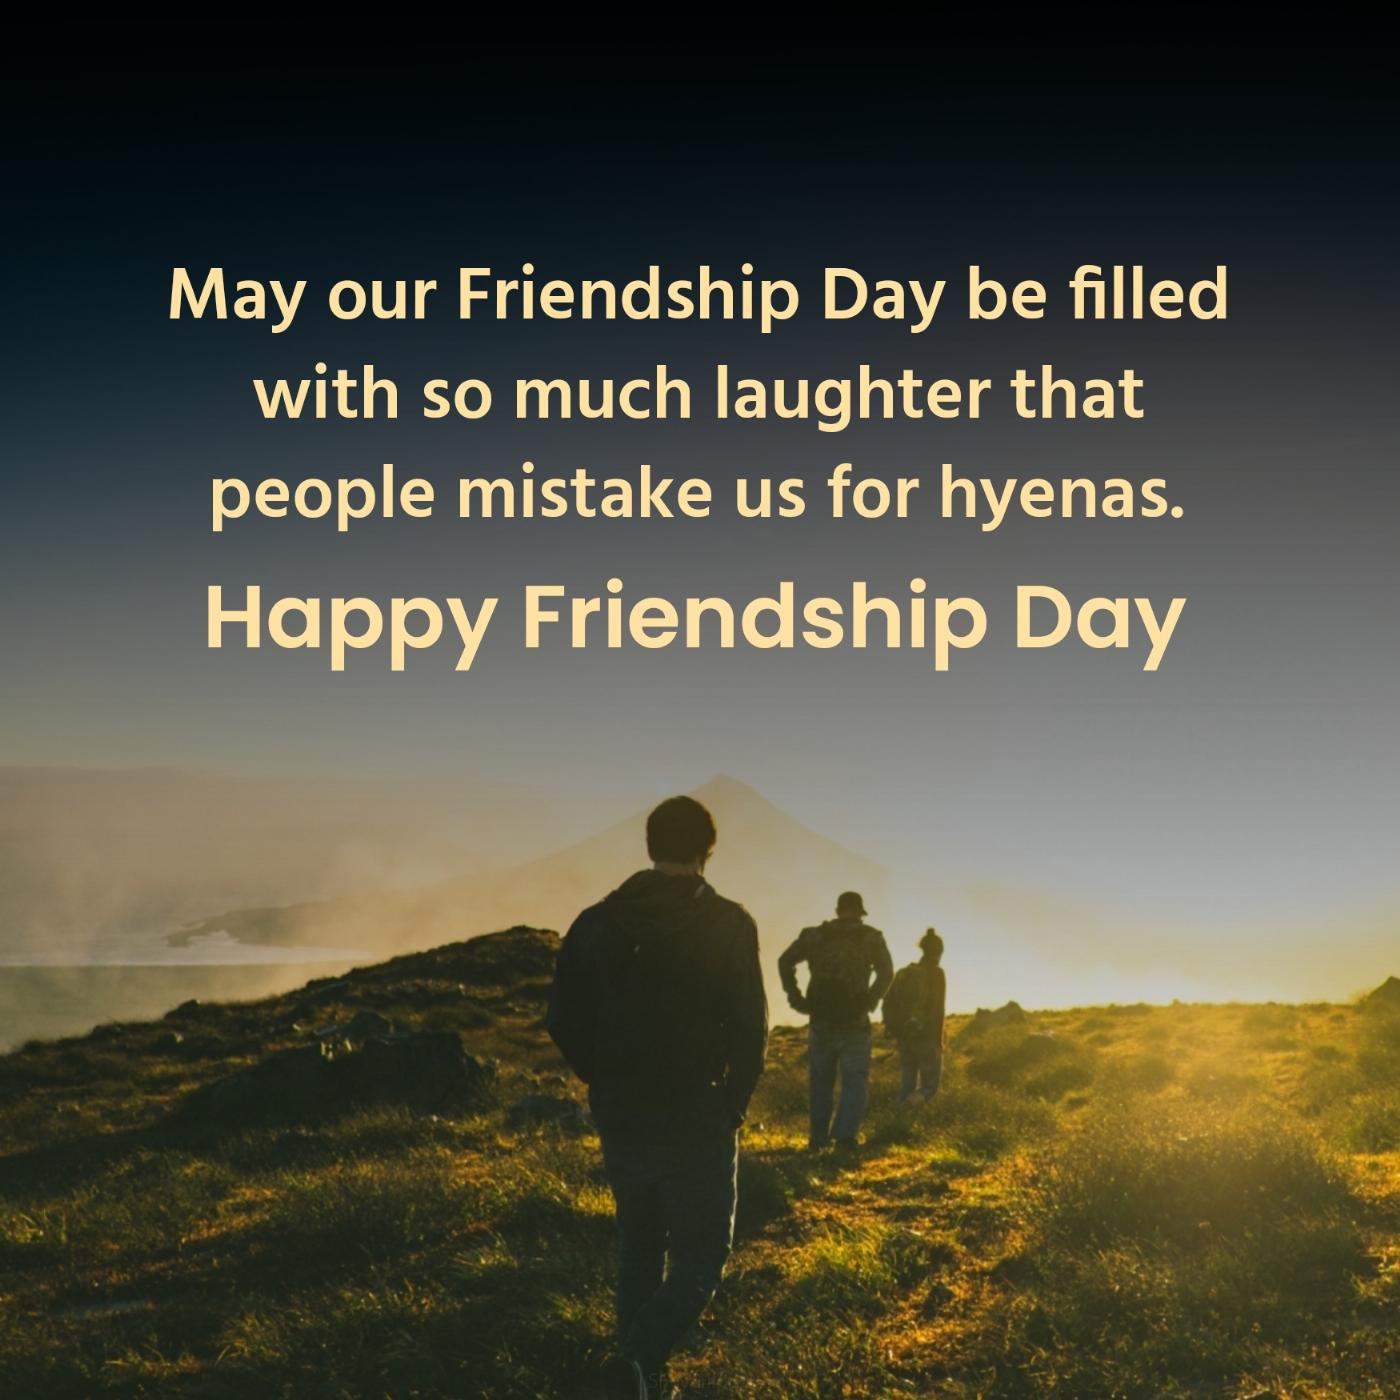 May our Friendship Day be filled with so much laughter that people mistake us for hyenas